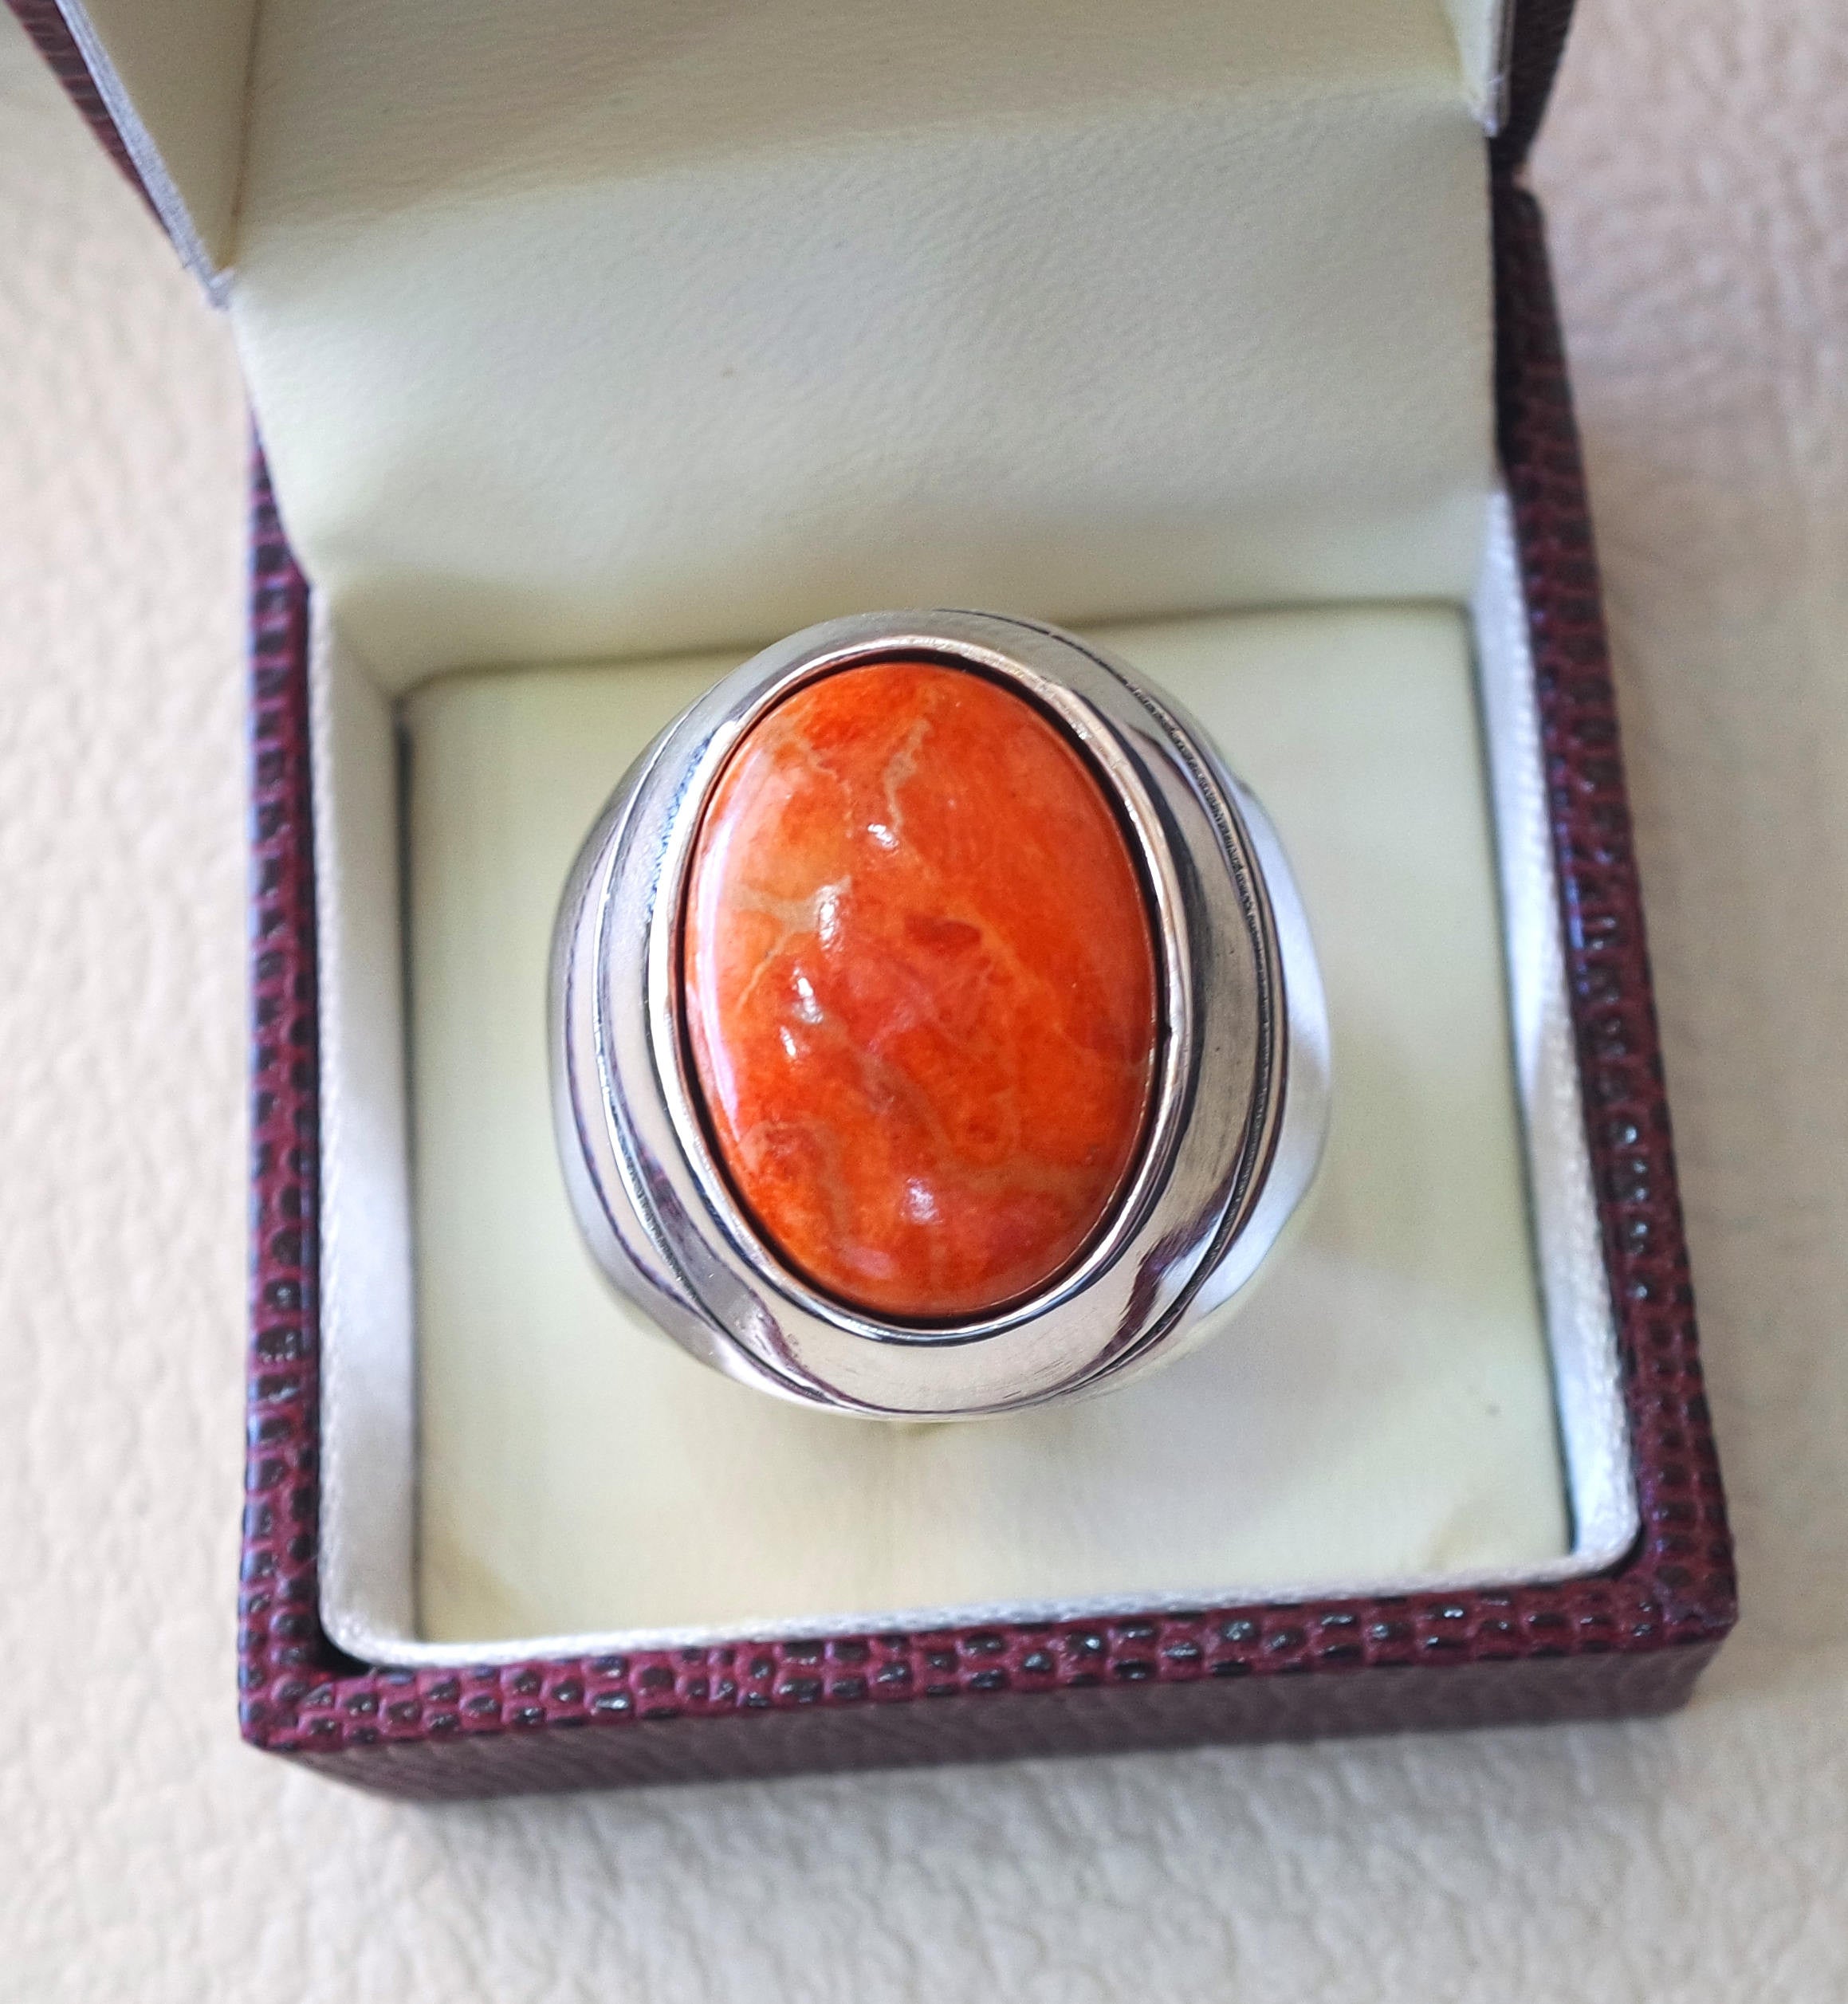 Sponge coral Murjan  heavy men ring orange to red natural stone sterling silver 925 vintage turkish style all sizes  fast shipping مرجان